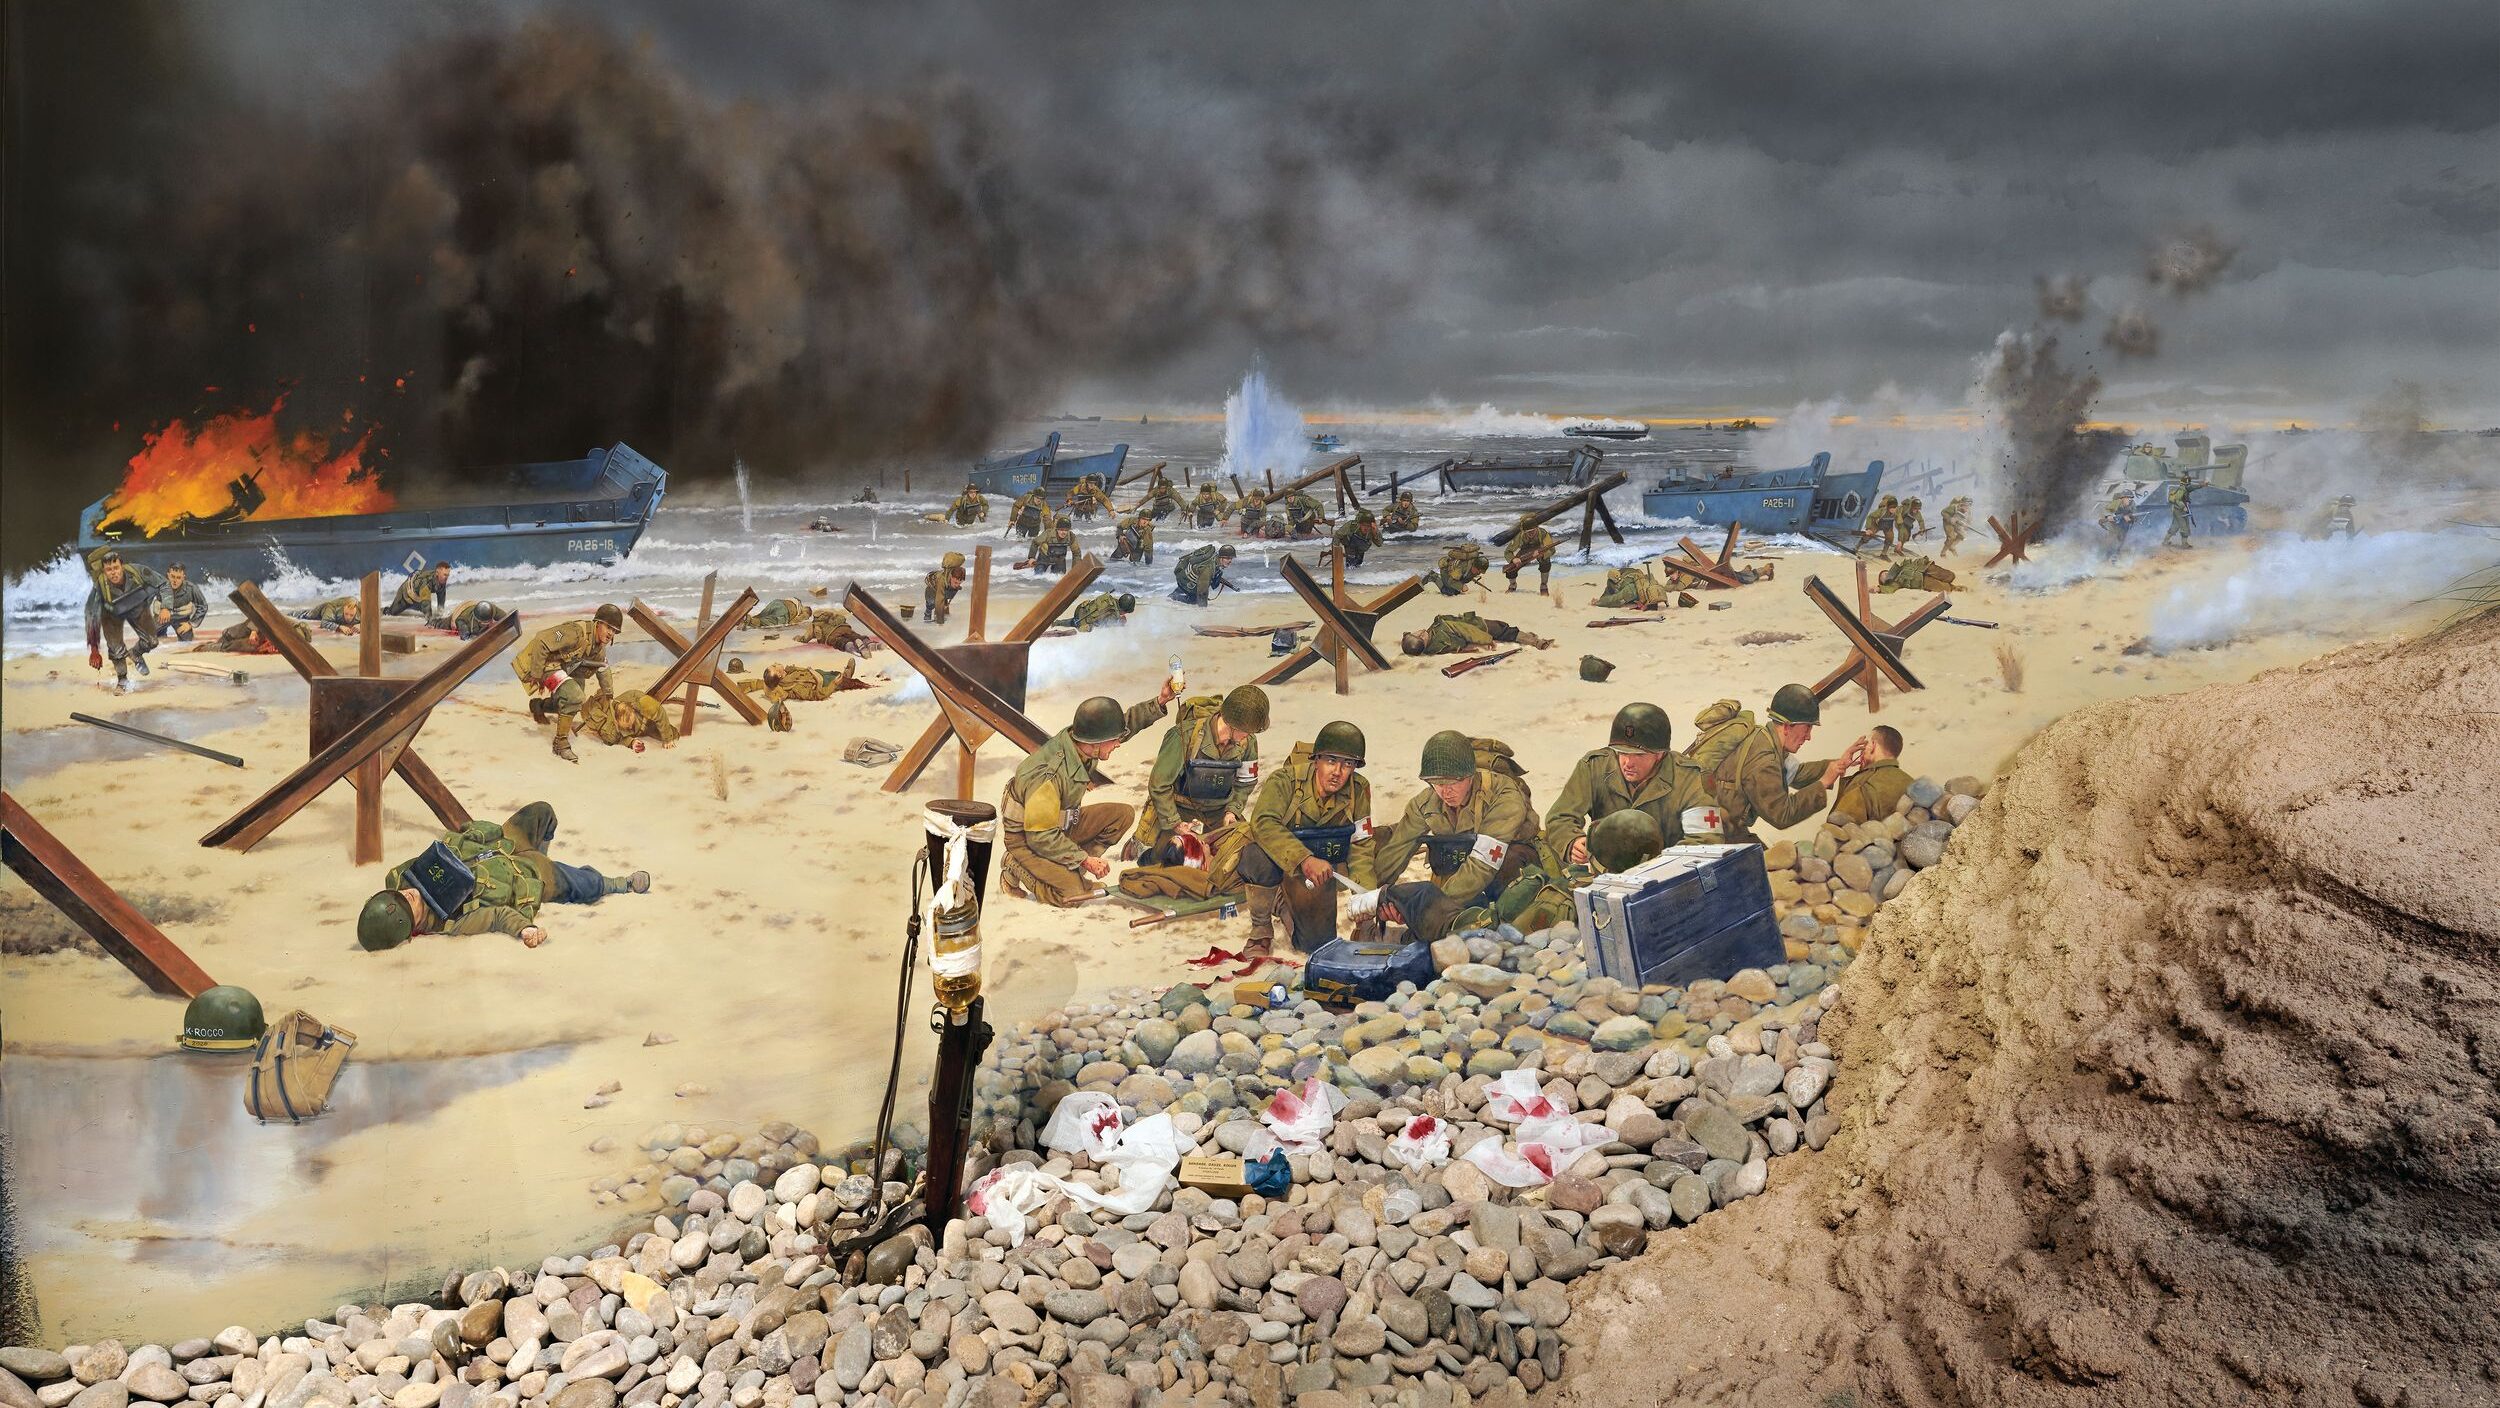 Medics, who have lost most of their supplies, still treat the wounded on Omaha Beach on June 6, 1944, in this mural by Keith Rocco. Center, left, bandaging a soldier’s leg is medic Charles Norman Shay, of the Penobscot Indian Nation, who received a Silver Star. Further to the left is wounded African American medic Waverly Woodson, Jr., who is helping a fellow soldier crawl forward. Woodson, who treated more than 200 men before collapsing after 30 hours, received a Bronze Star.